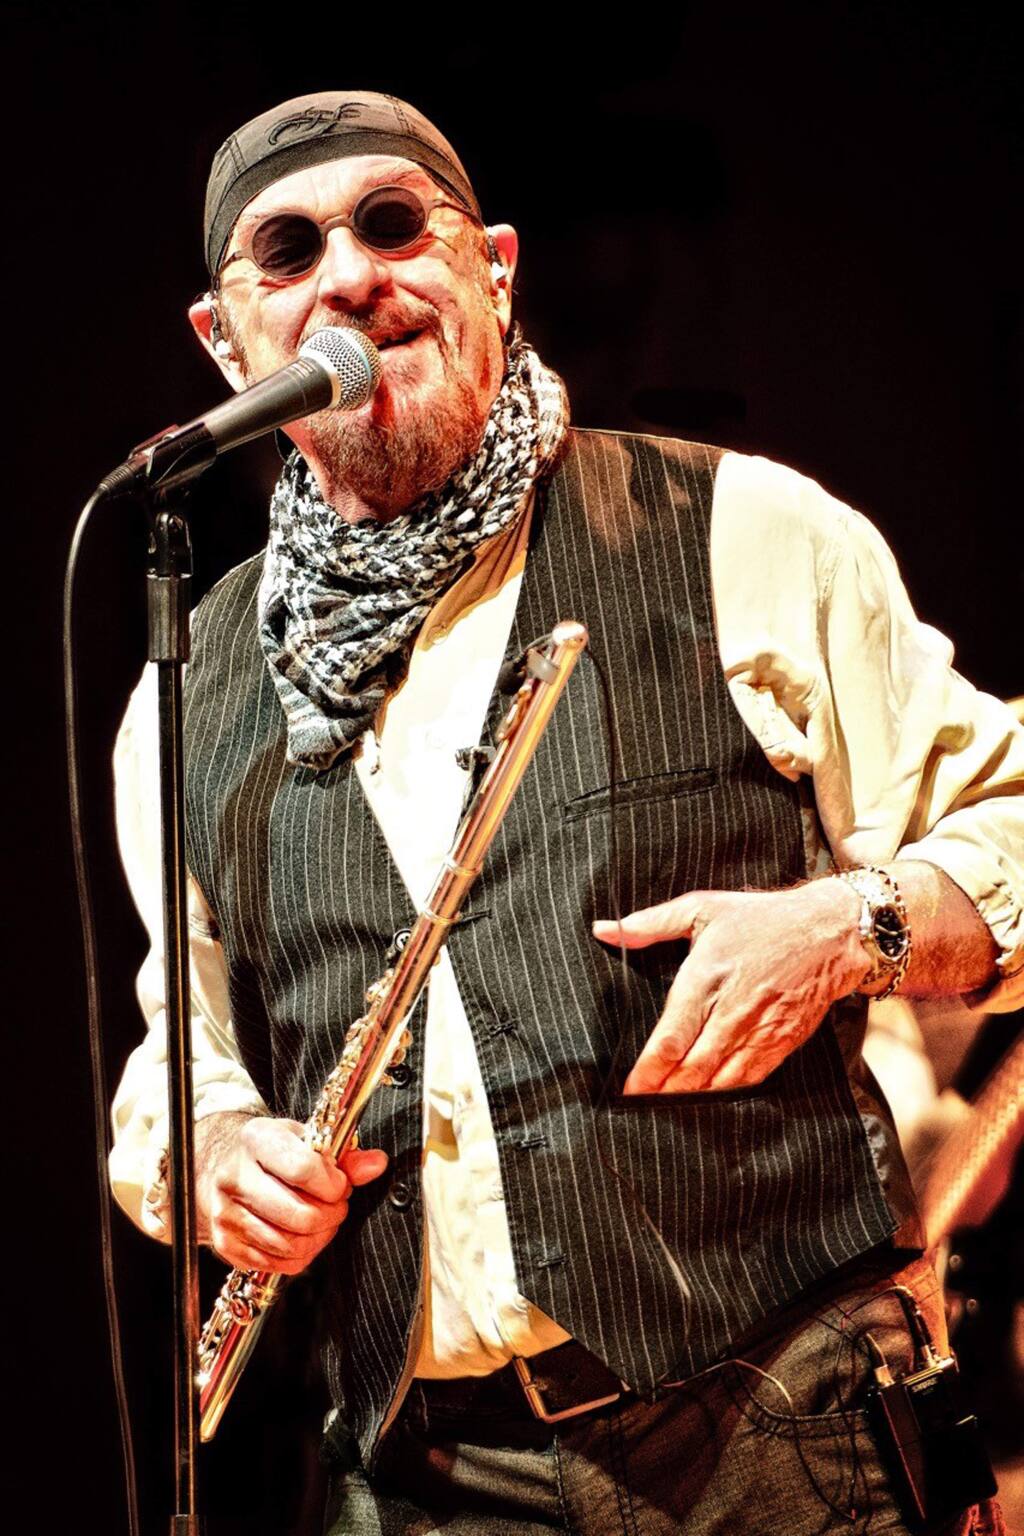 Jethro Tull's Ian Anderson Interview on Strings, Guitars, Touring